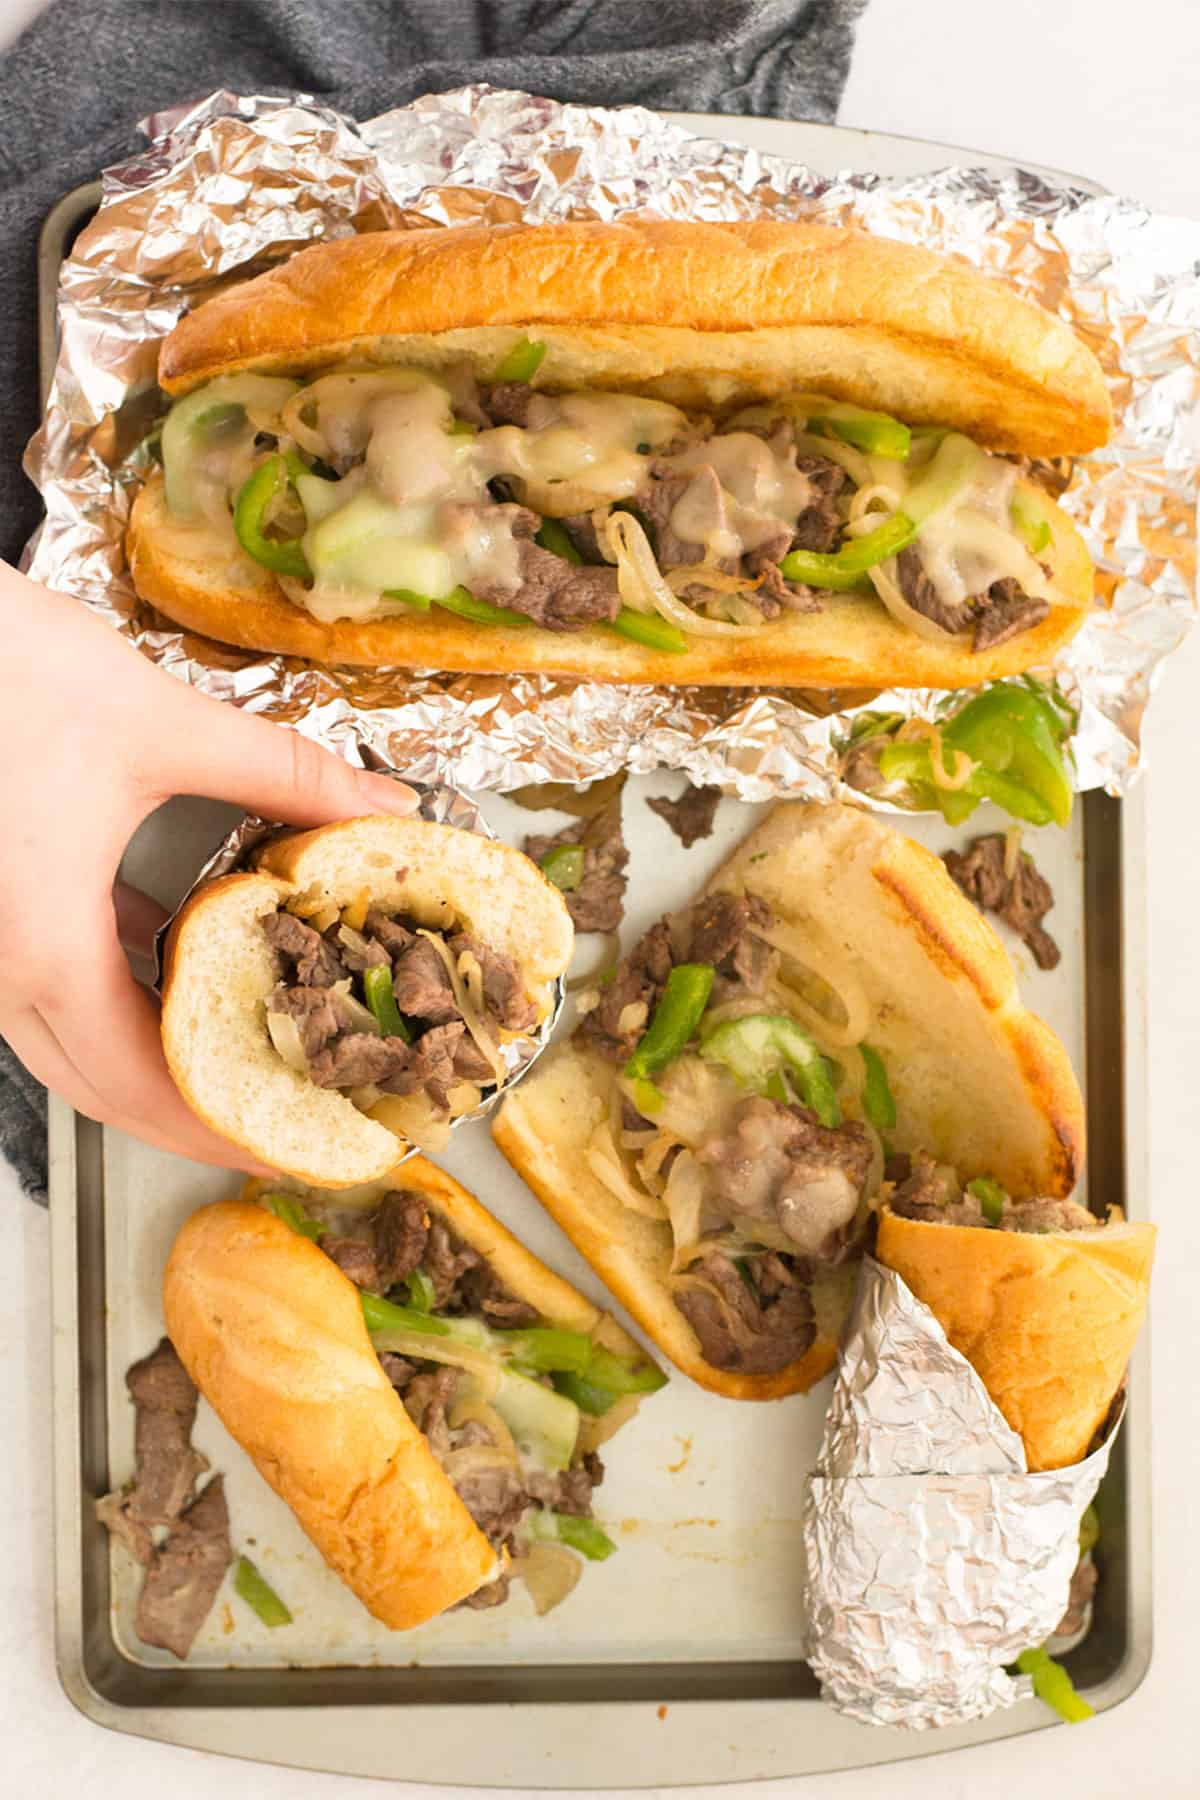 A metal pan holds a whole sandwich and four halves of a sandwich that are scattered around.  Some are wrapped in foil and one hand is holding one half of a sandwich.